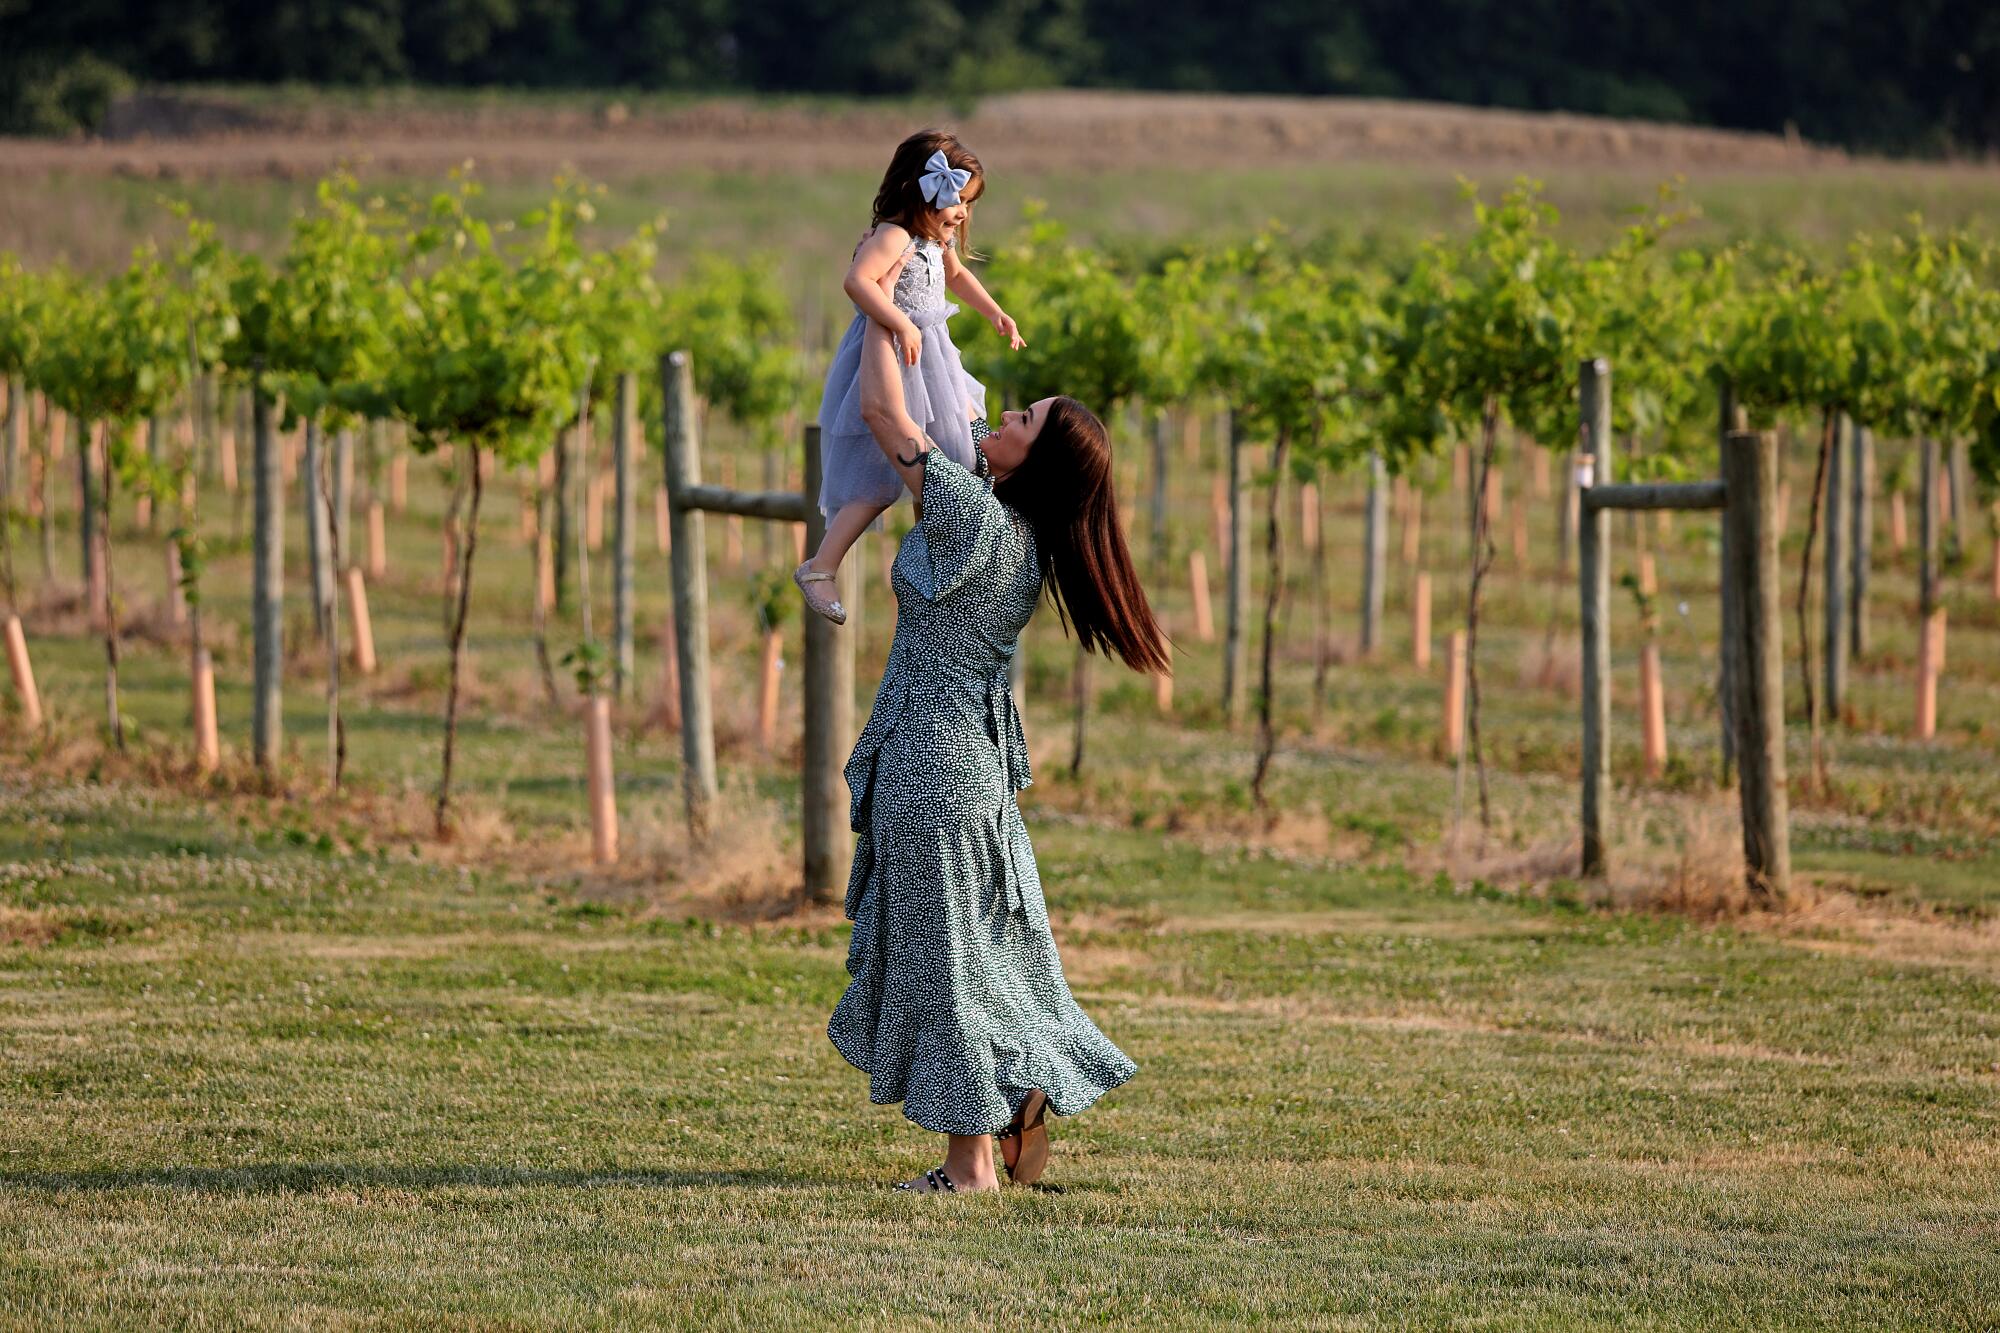 A woman holds a small child up in the air in a field next to a vineyard